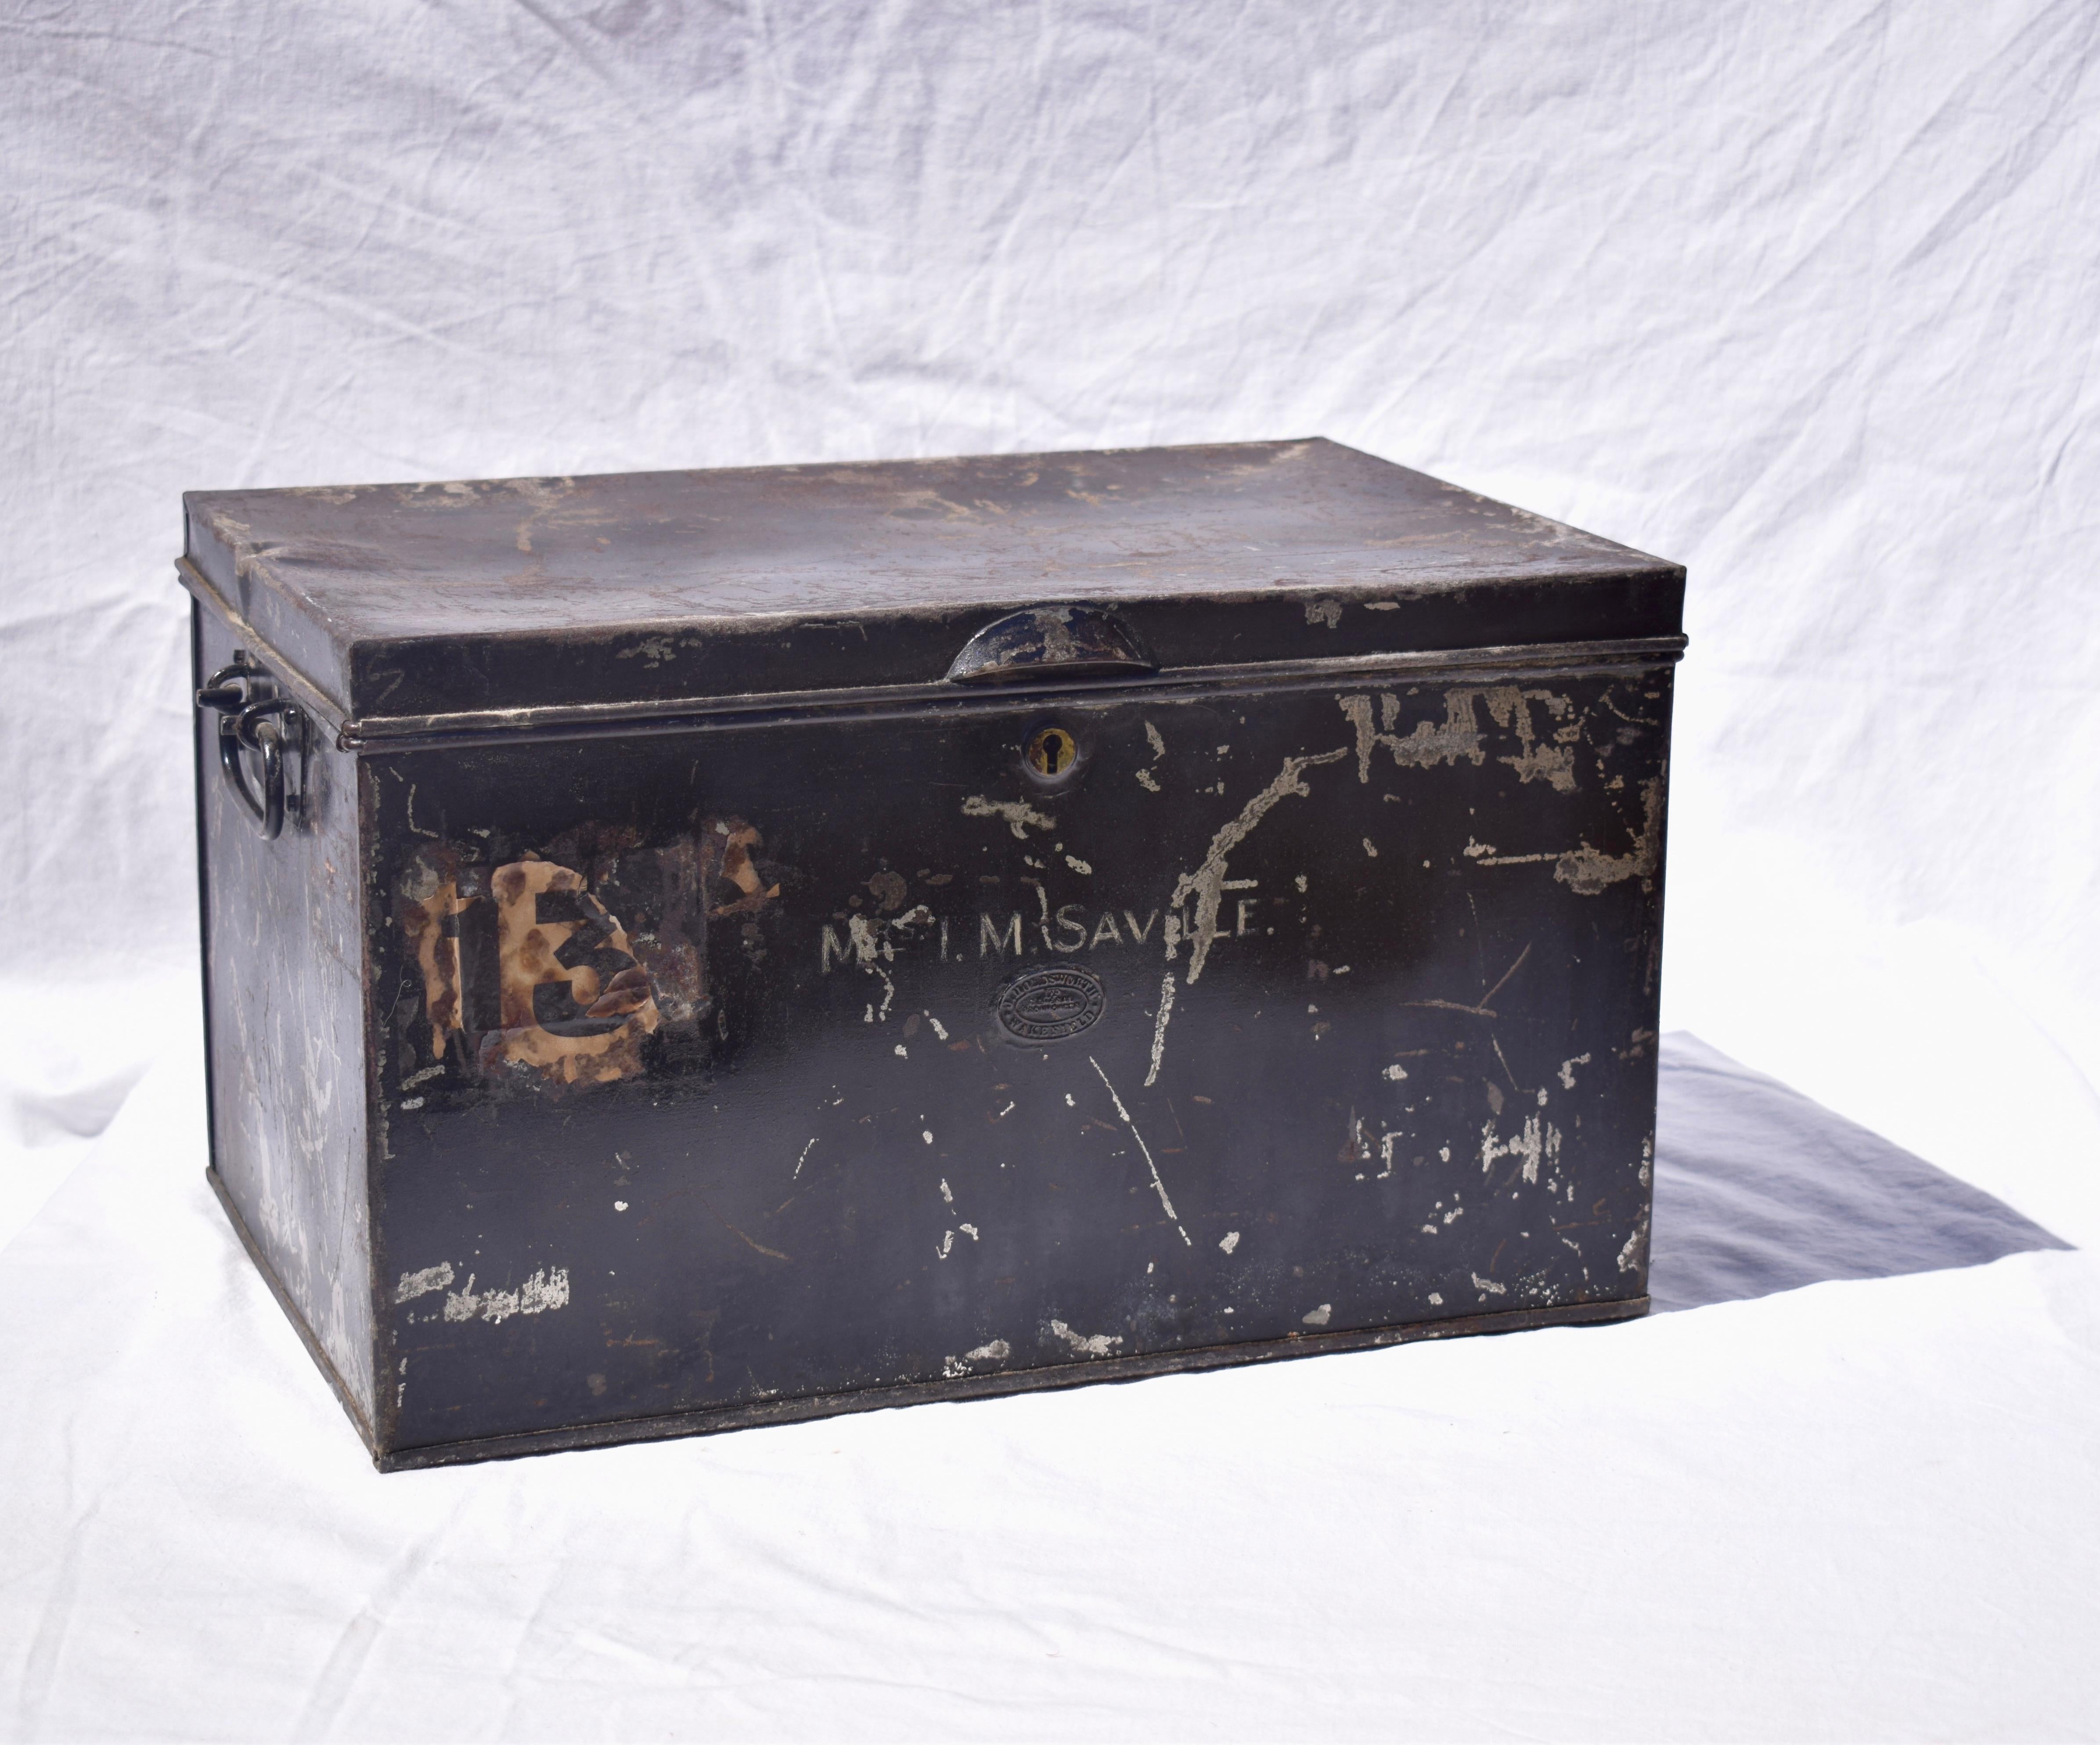 This late 19th century metal safe box would have been used as a documentation chest to store and dispatch legal deeds or documents. The metal box is a good Size and it has two handles on either side making it easy to move around. As the image shows